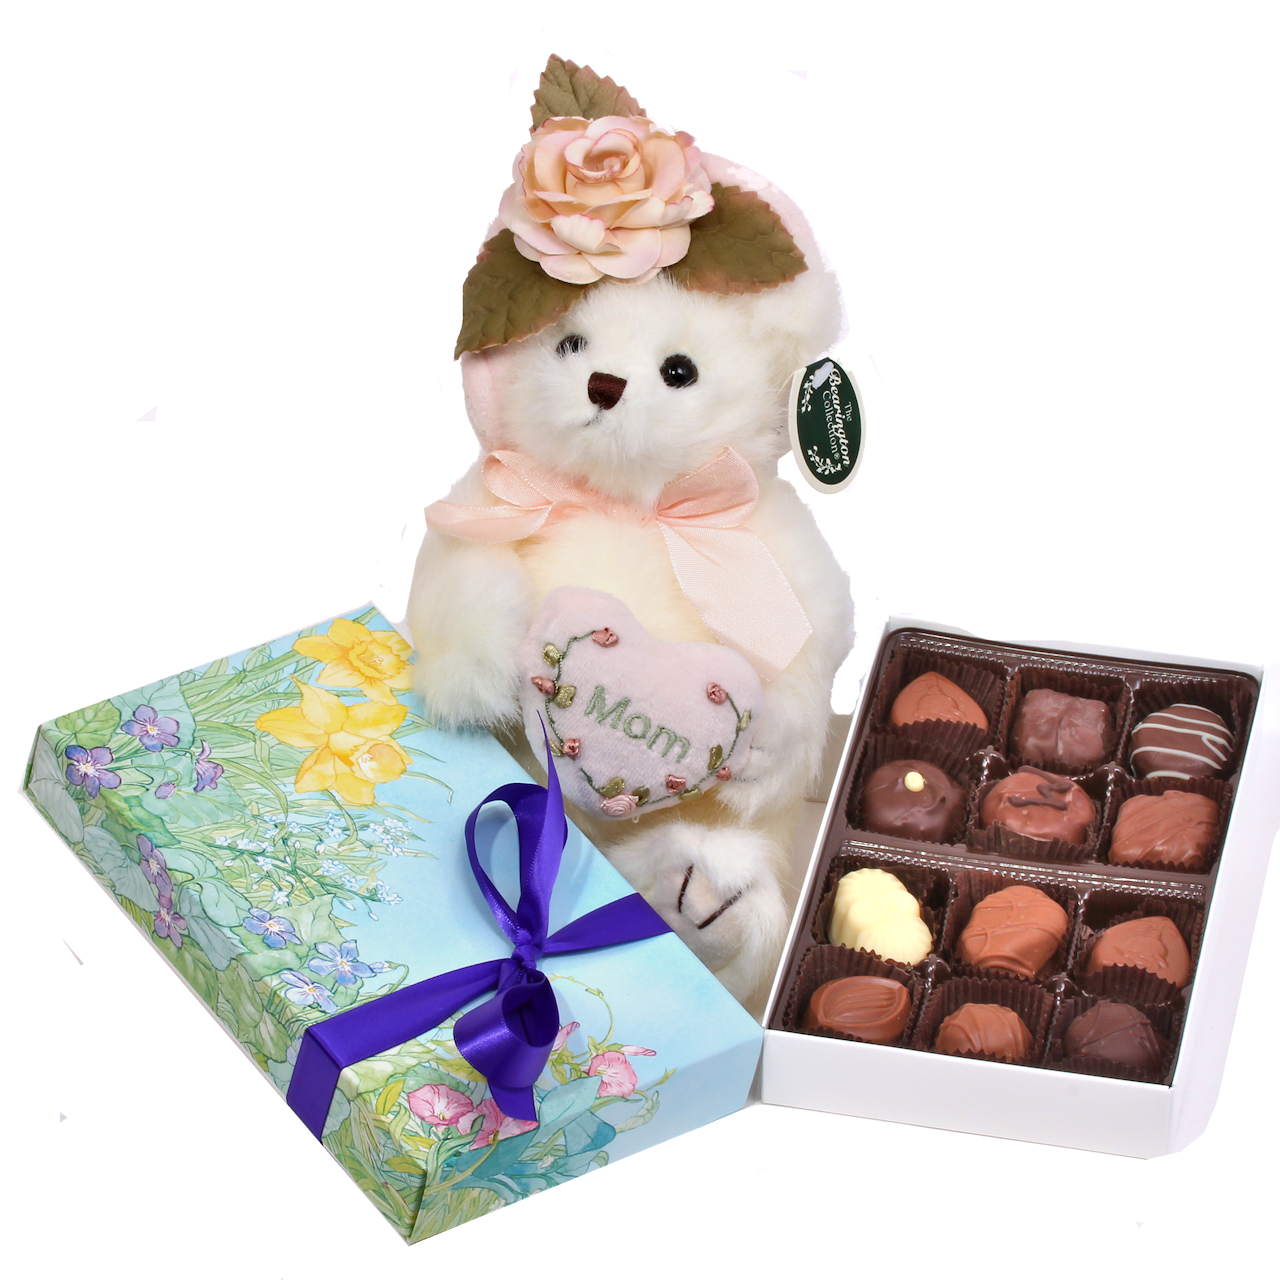 Mother's Day Chocolates & Bear